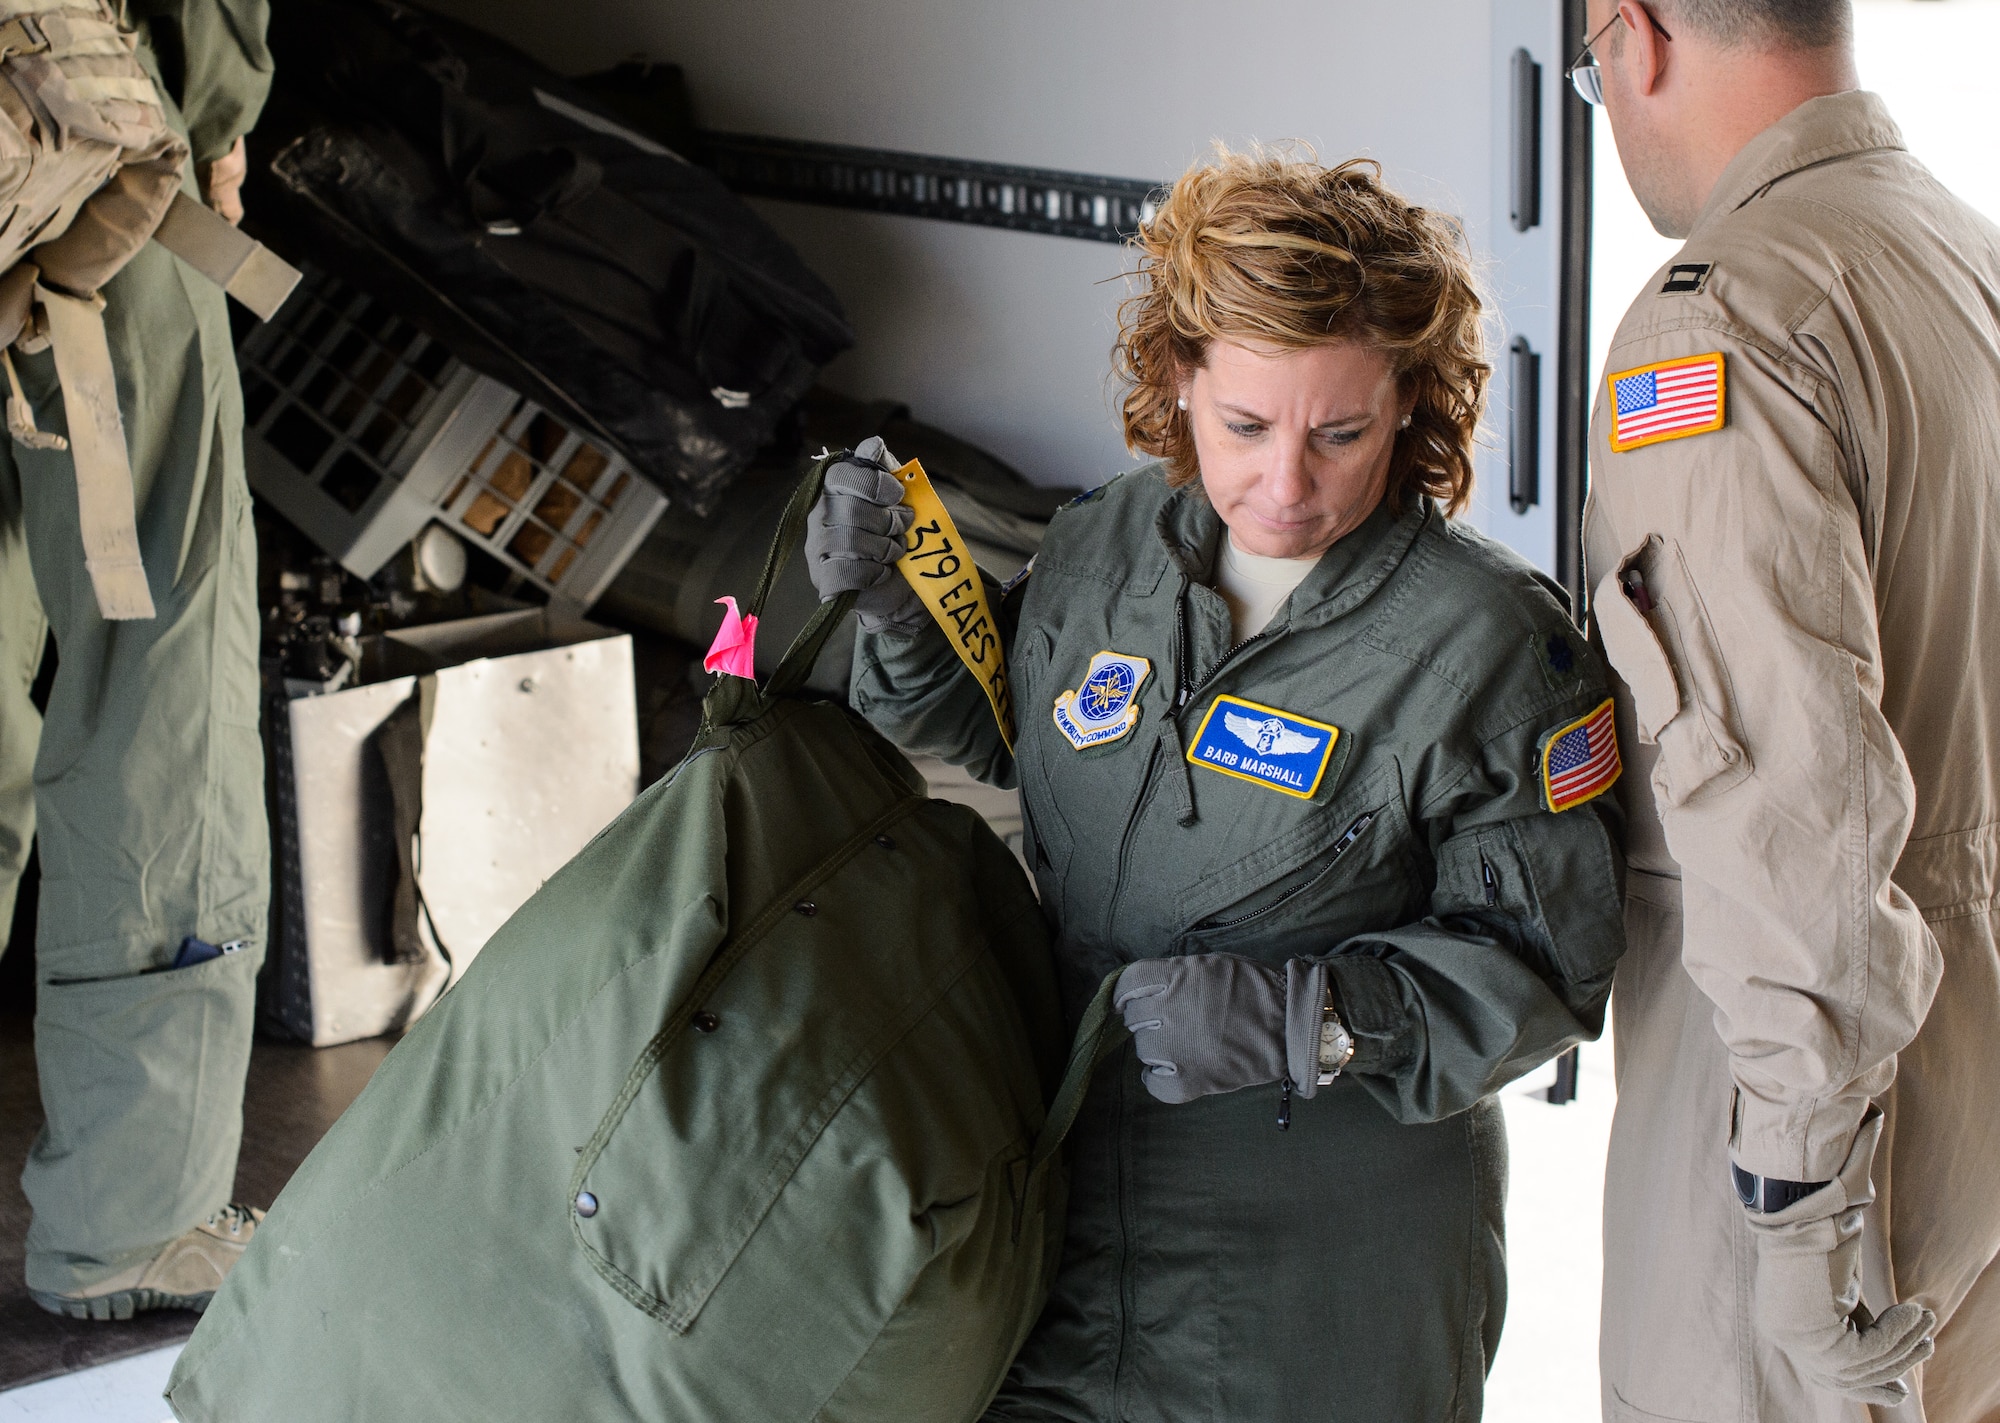 Lt. Col. Barb Marshall, 10th Expeditionary Aeromedical Evacuation Flight chief nurse, unloads a bag in preparation for an aeromedical evacuation sortie Nov. 10, 2015, at Ramstein Air Base, Germany. The flying crew and other members of the 10th EAEF help set up an aircraft to ensure medical personnel took off on time. (U.S. Air Force photo/Staff Sgt. Armando A. Schwier-Morales)